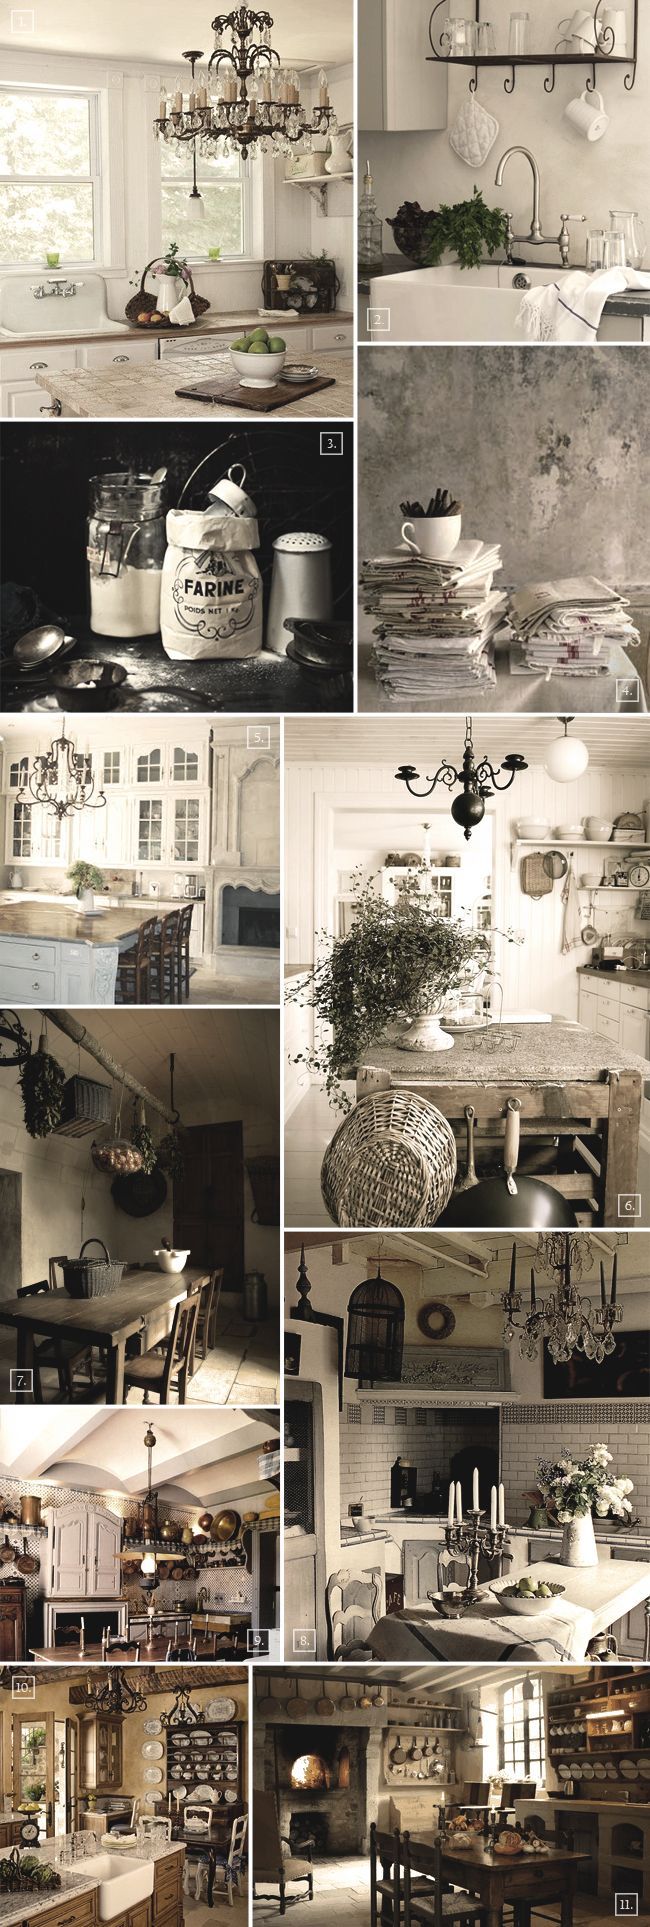 French Kitchen Decor and Designs Mood Board -   19 french kitchen decor
 ideas